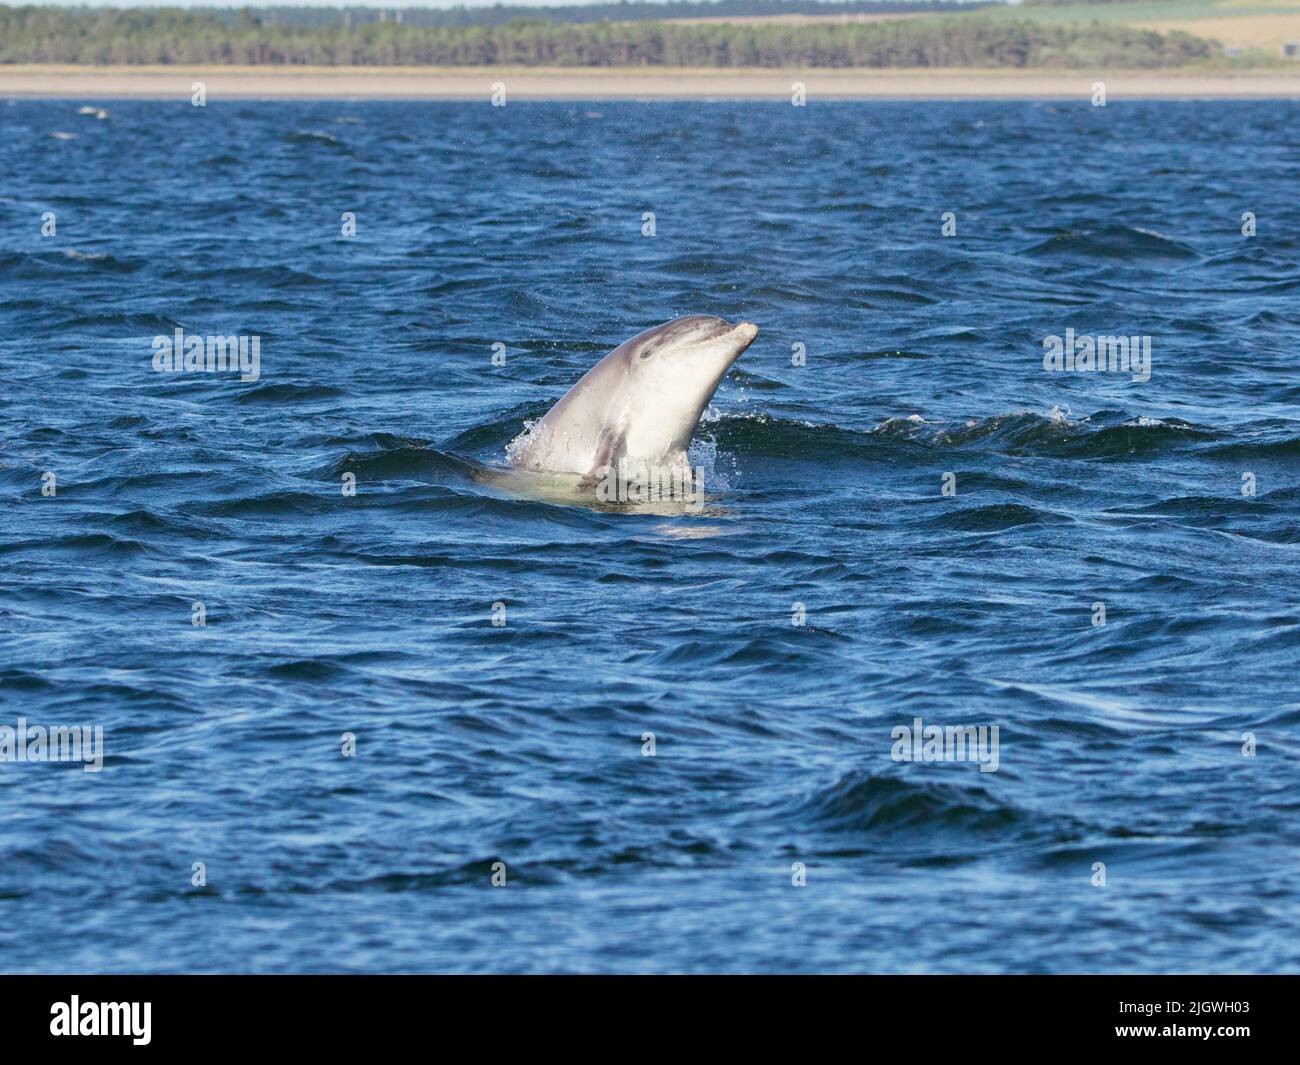 Young bottlenose dolphin (Tursiops truncatus) breaching, jumping, leaping in the Moray Firth, Scotland, UK Stock Photo